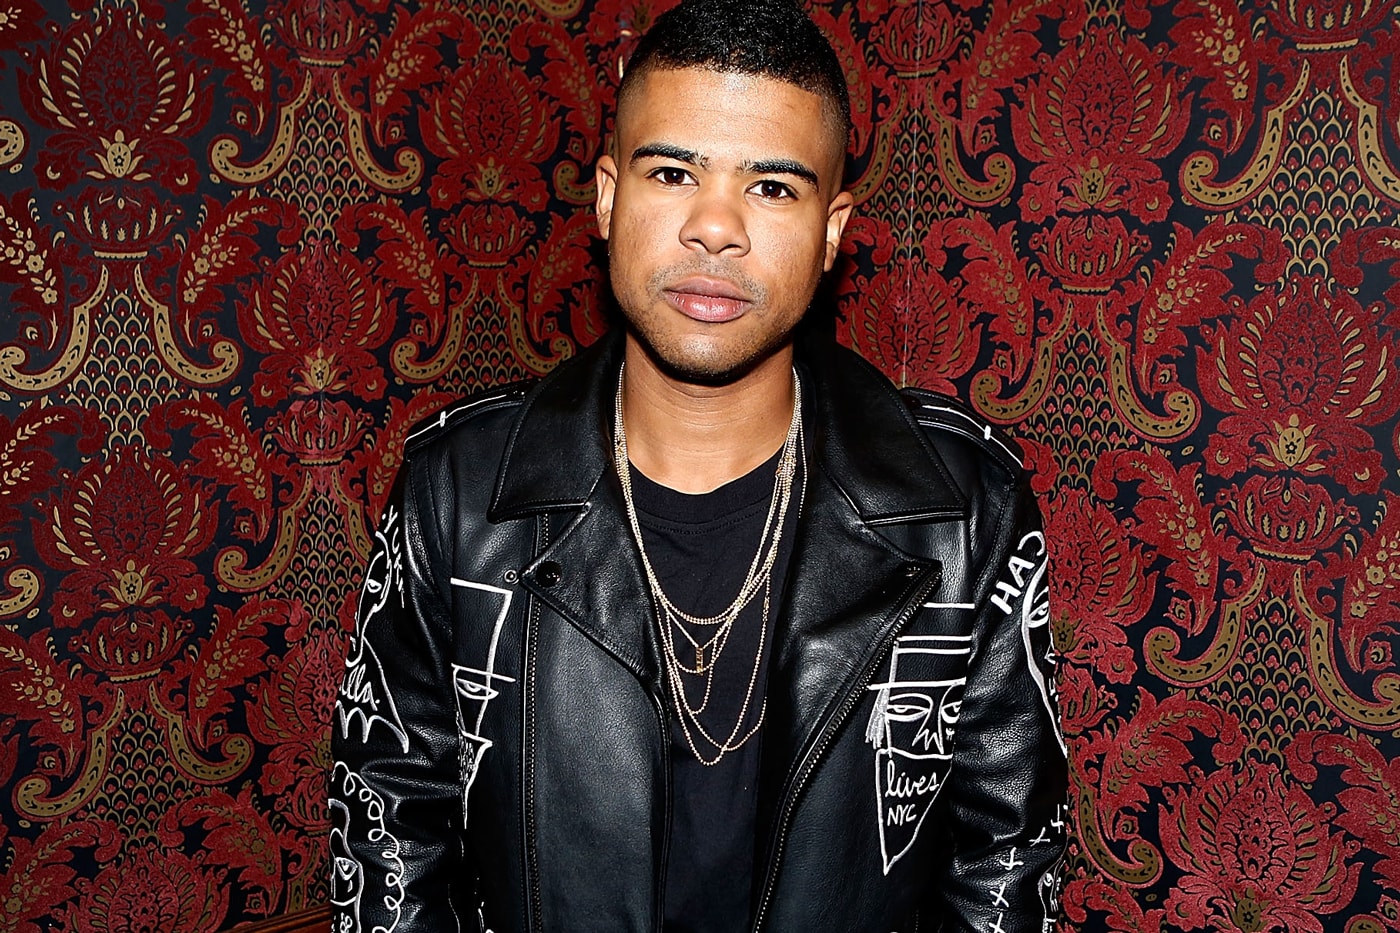 iLoveMakonnen and Tunji Ige, "Don't Do Too Much"